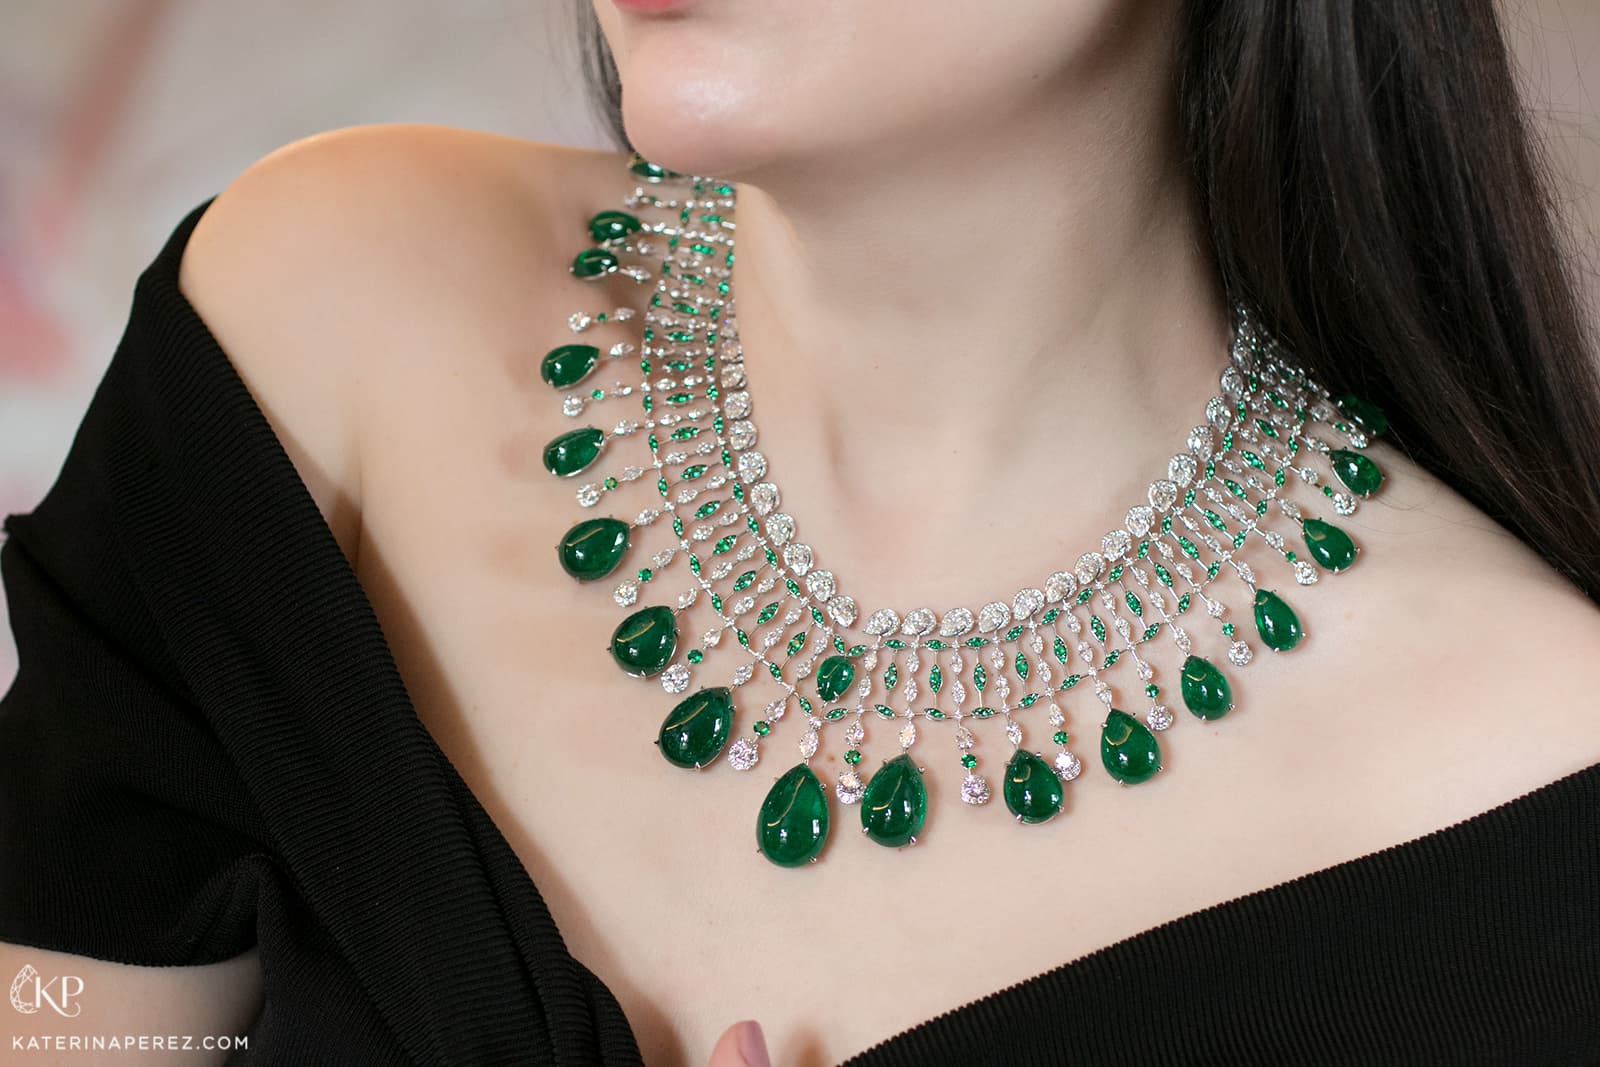 Chopard Red Carpet 2019 collection necklace with pear cut cabochon emeralds, emeralds and diamonds